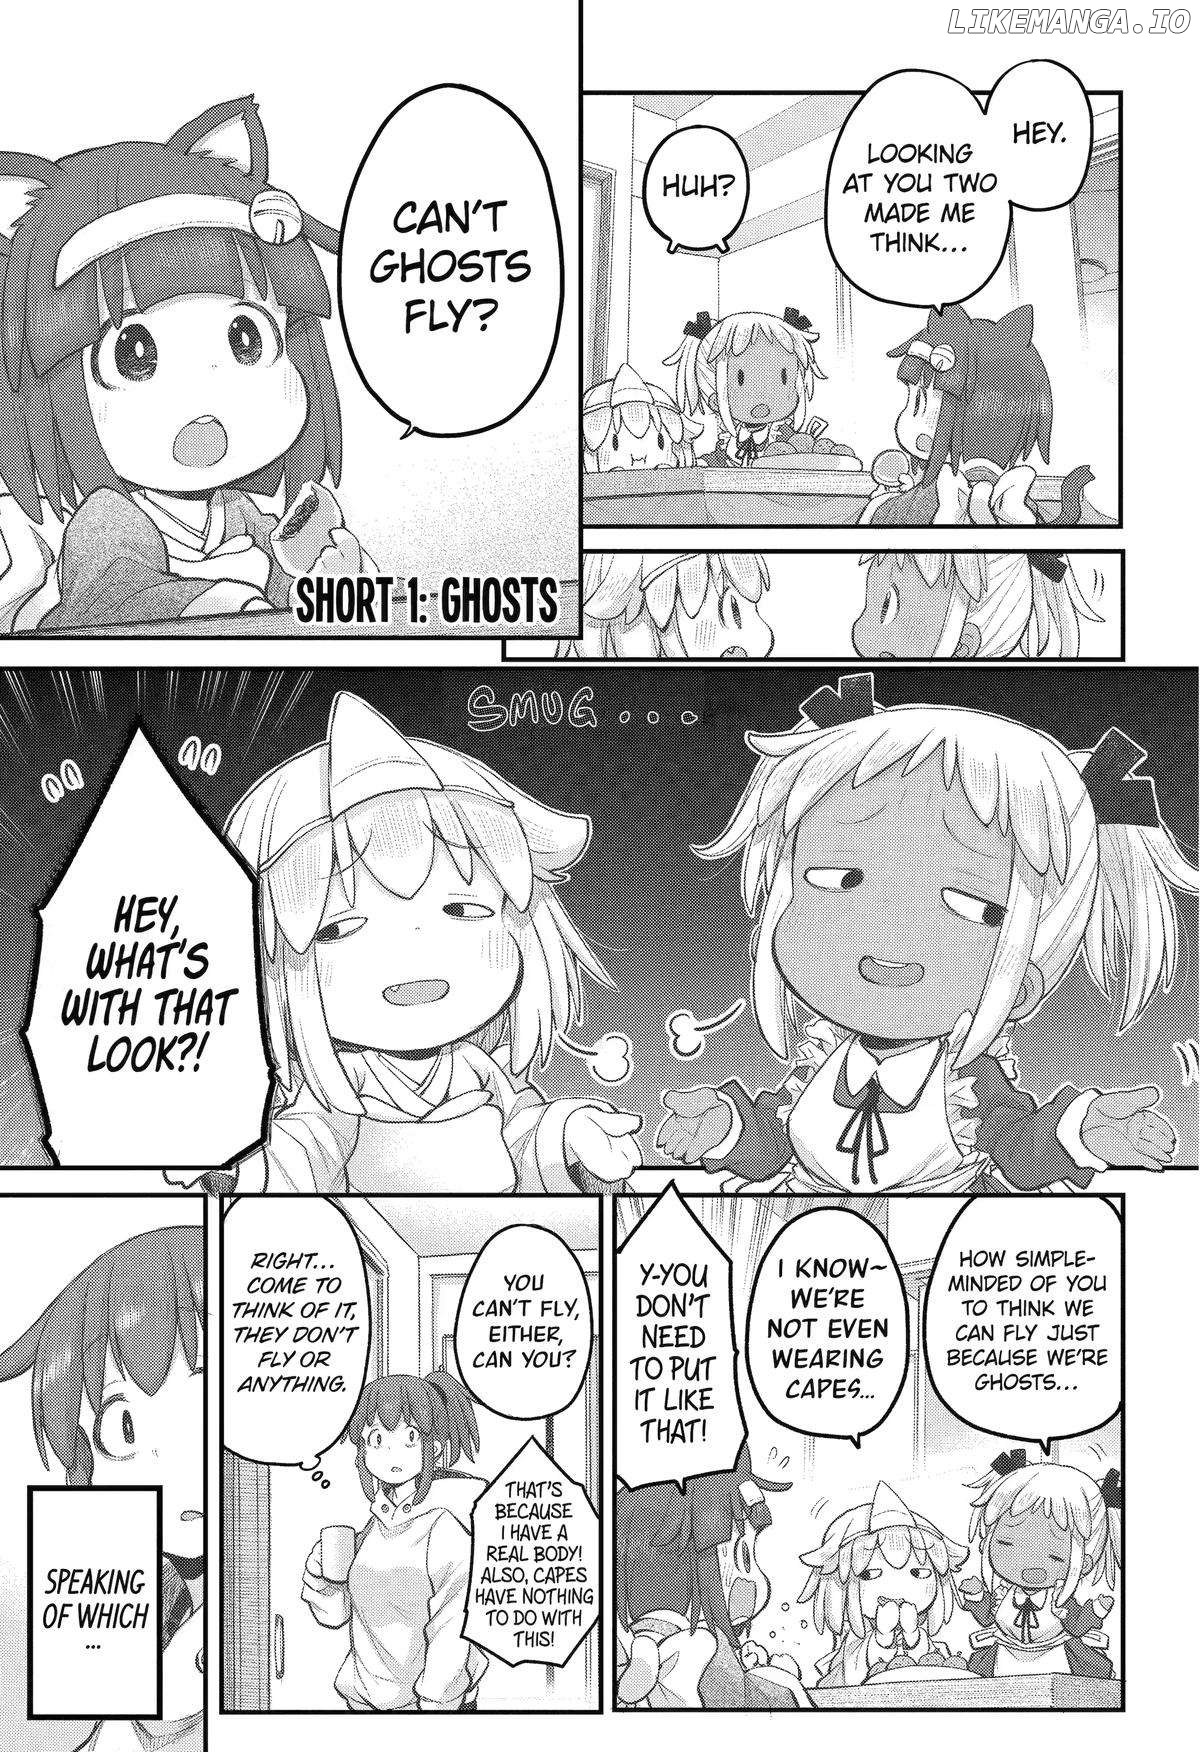 Ms. Corporate Slave Wants to be Healed by a Loli Spirit - chapter 106 - #1